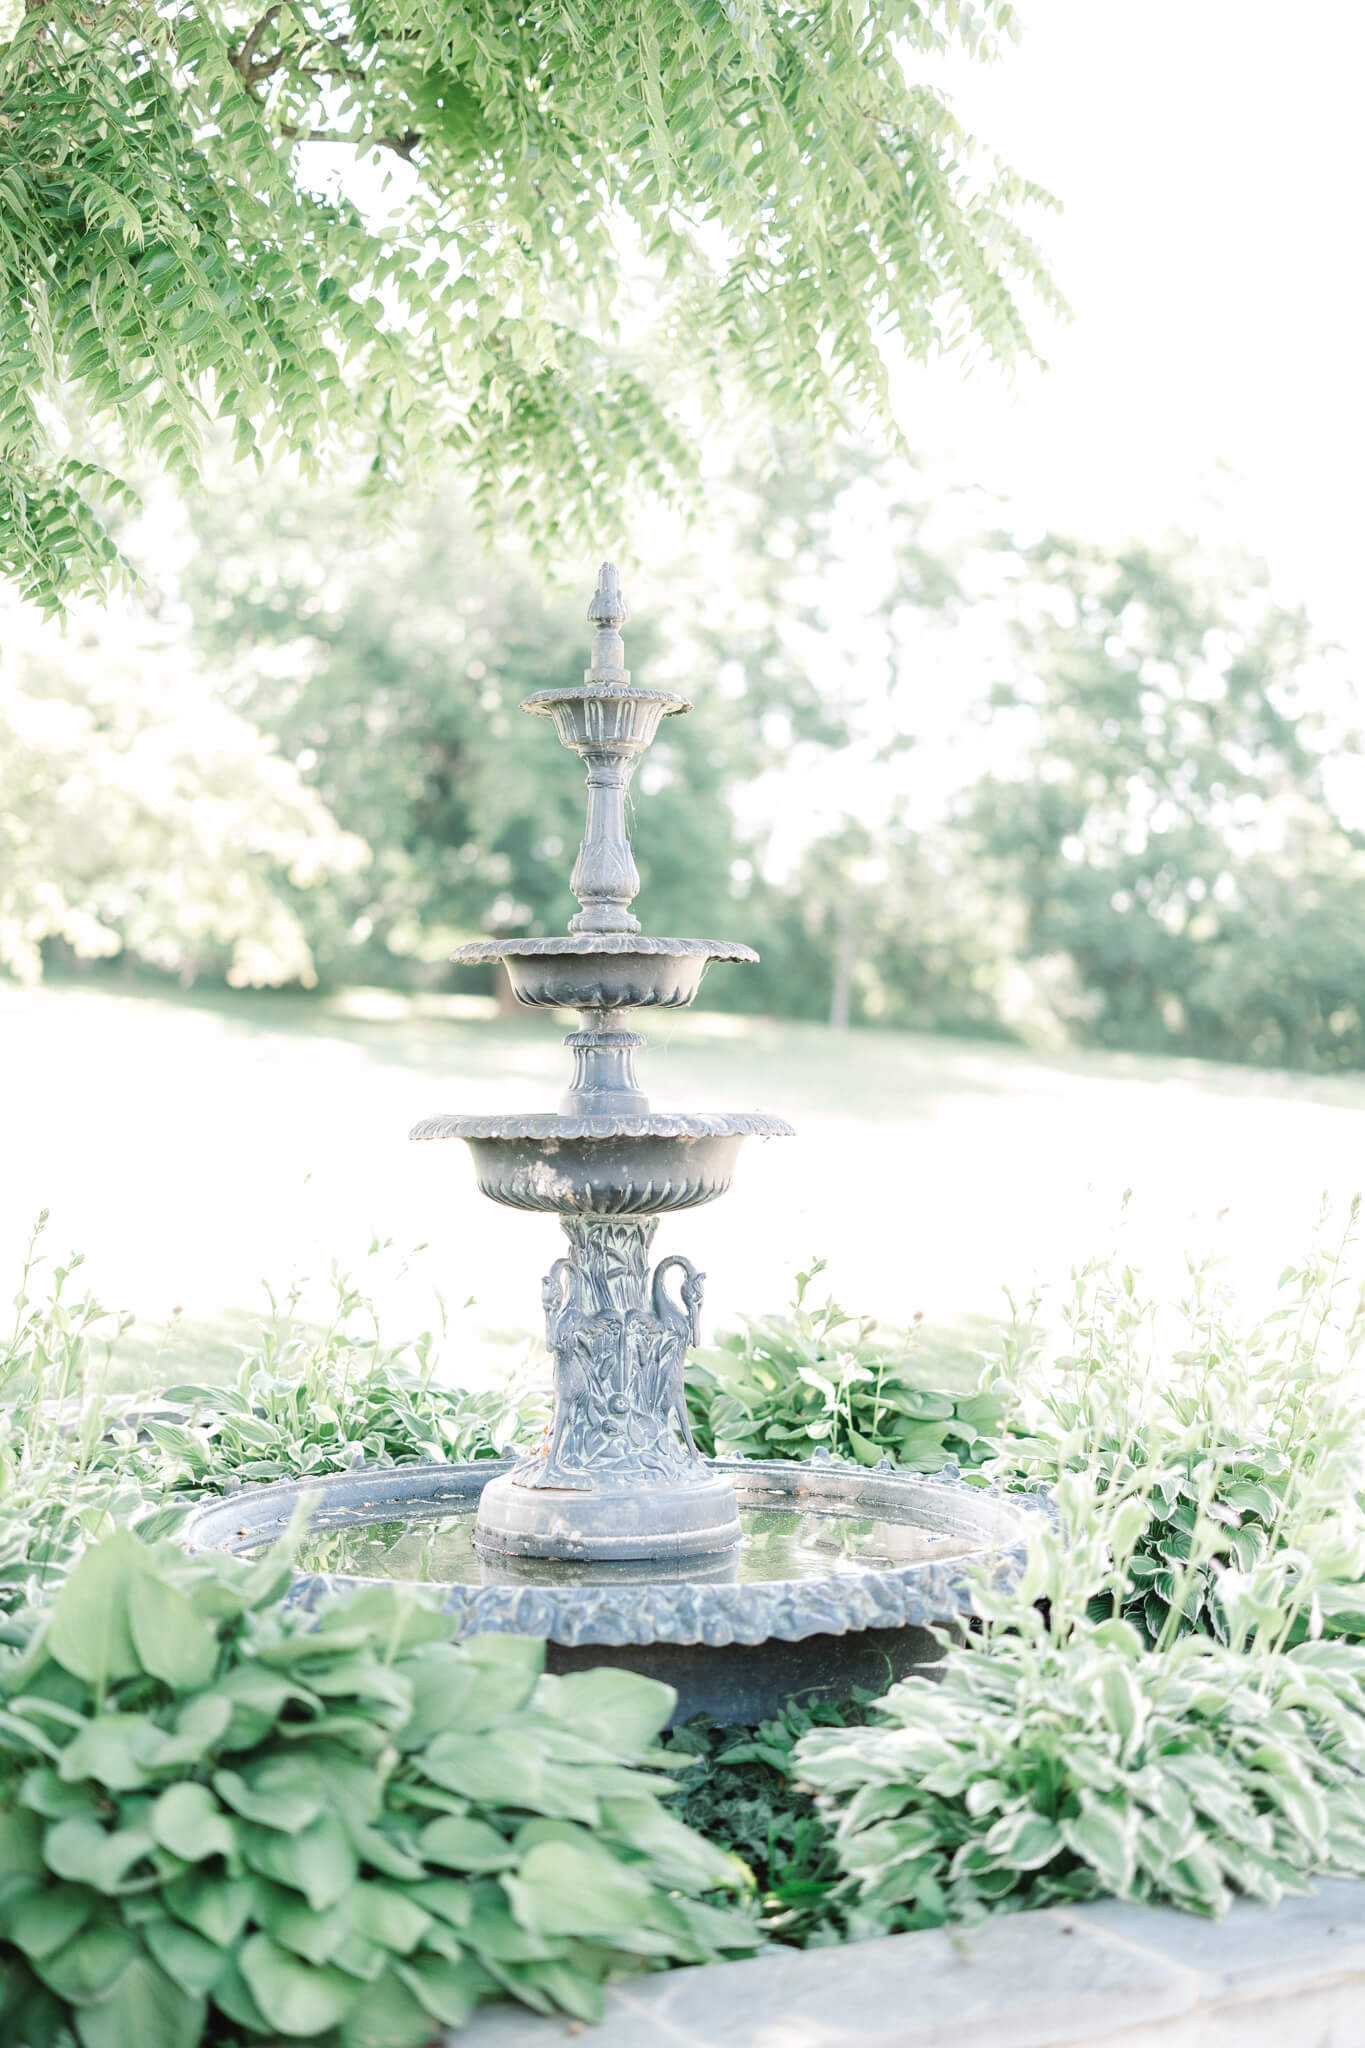 fountain and view of plants and field